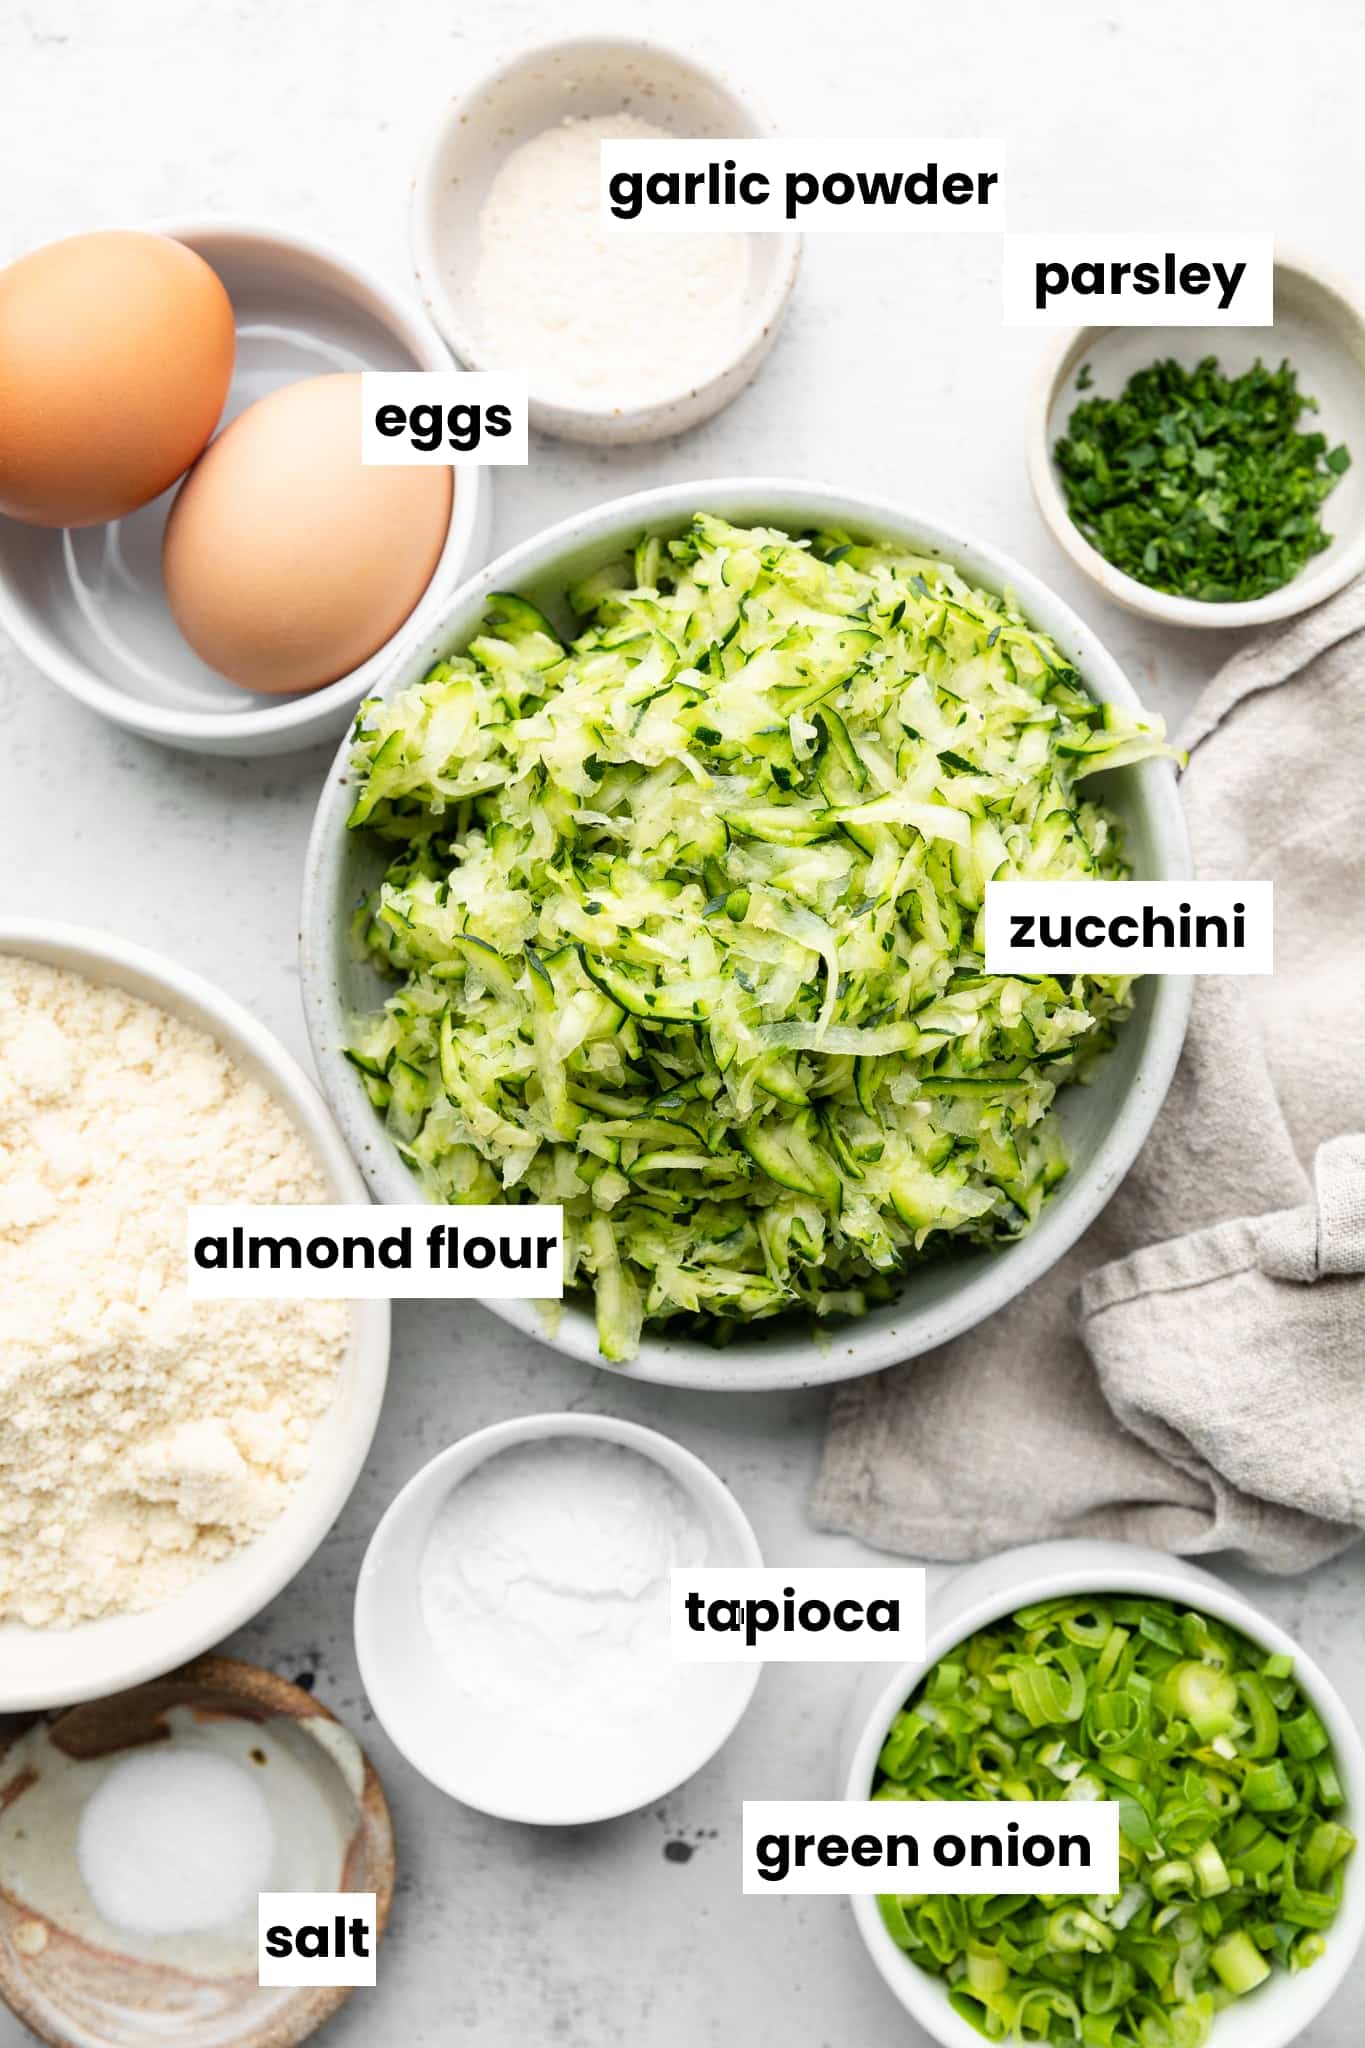 Ingredients for the recipe, including shredded zucchini in a bowl.